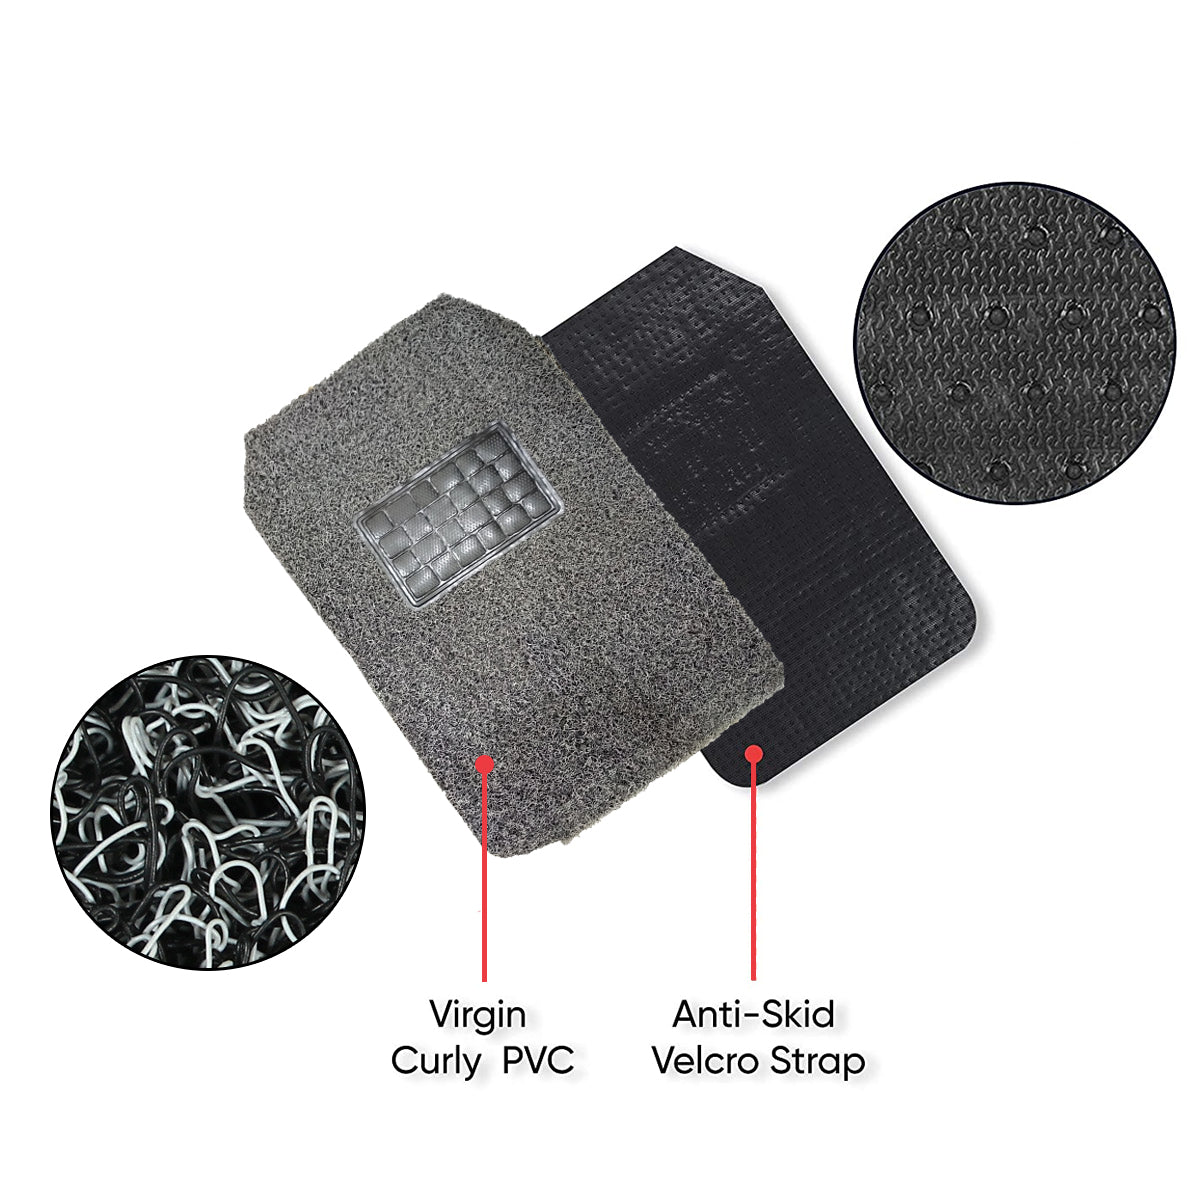 Oshotto Anti Skid Curly Noodle Grass 12mm Car Foot/Floor Mats for All Cars (Set of 5, Black)